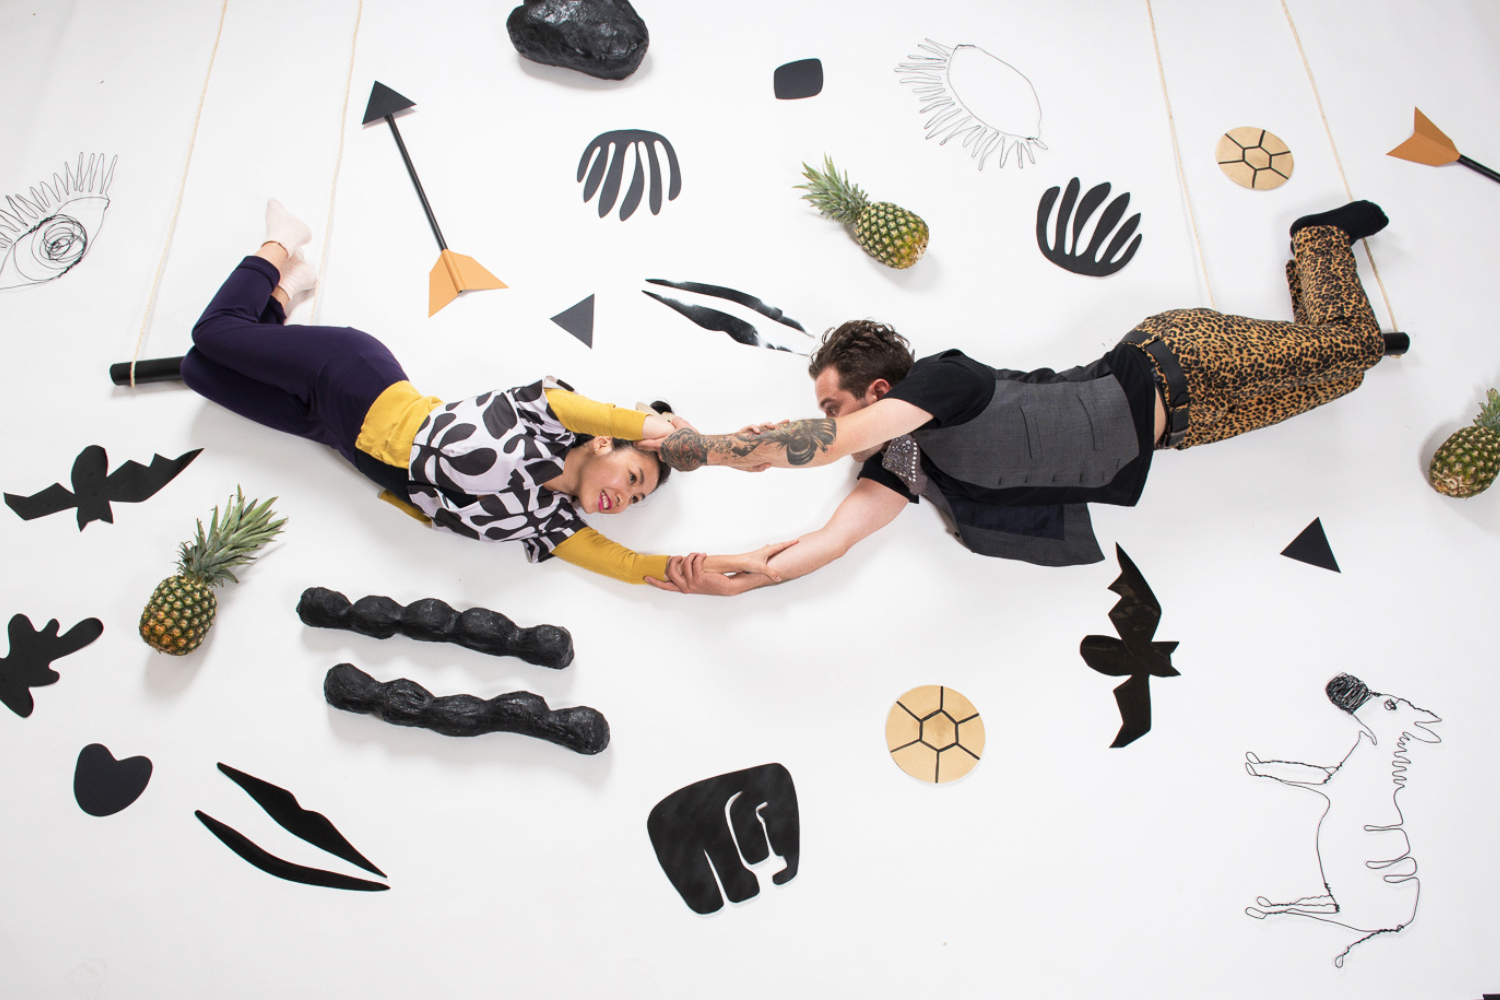 Two models grab hands as they hang from trapeze swings, one model is facing left and another model is facing right. A white wall is behind them. On the wall are a number of black geometric shapes, black bats, pineapples and small round shapes with black intersecting lines.